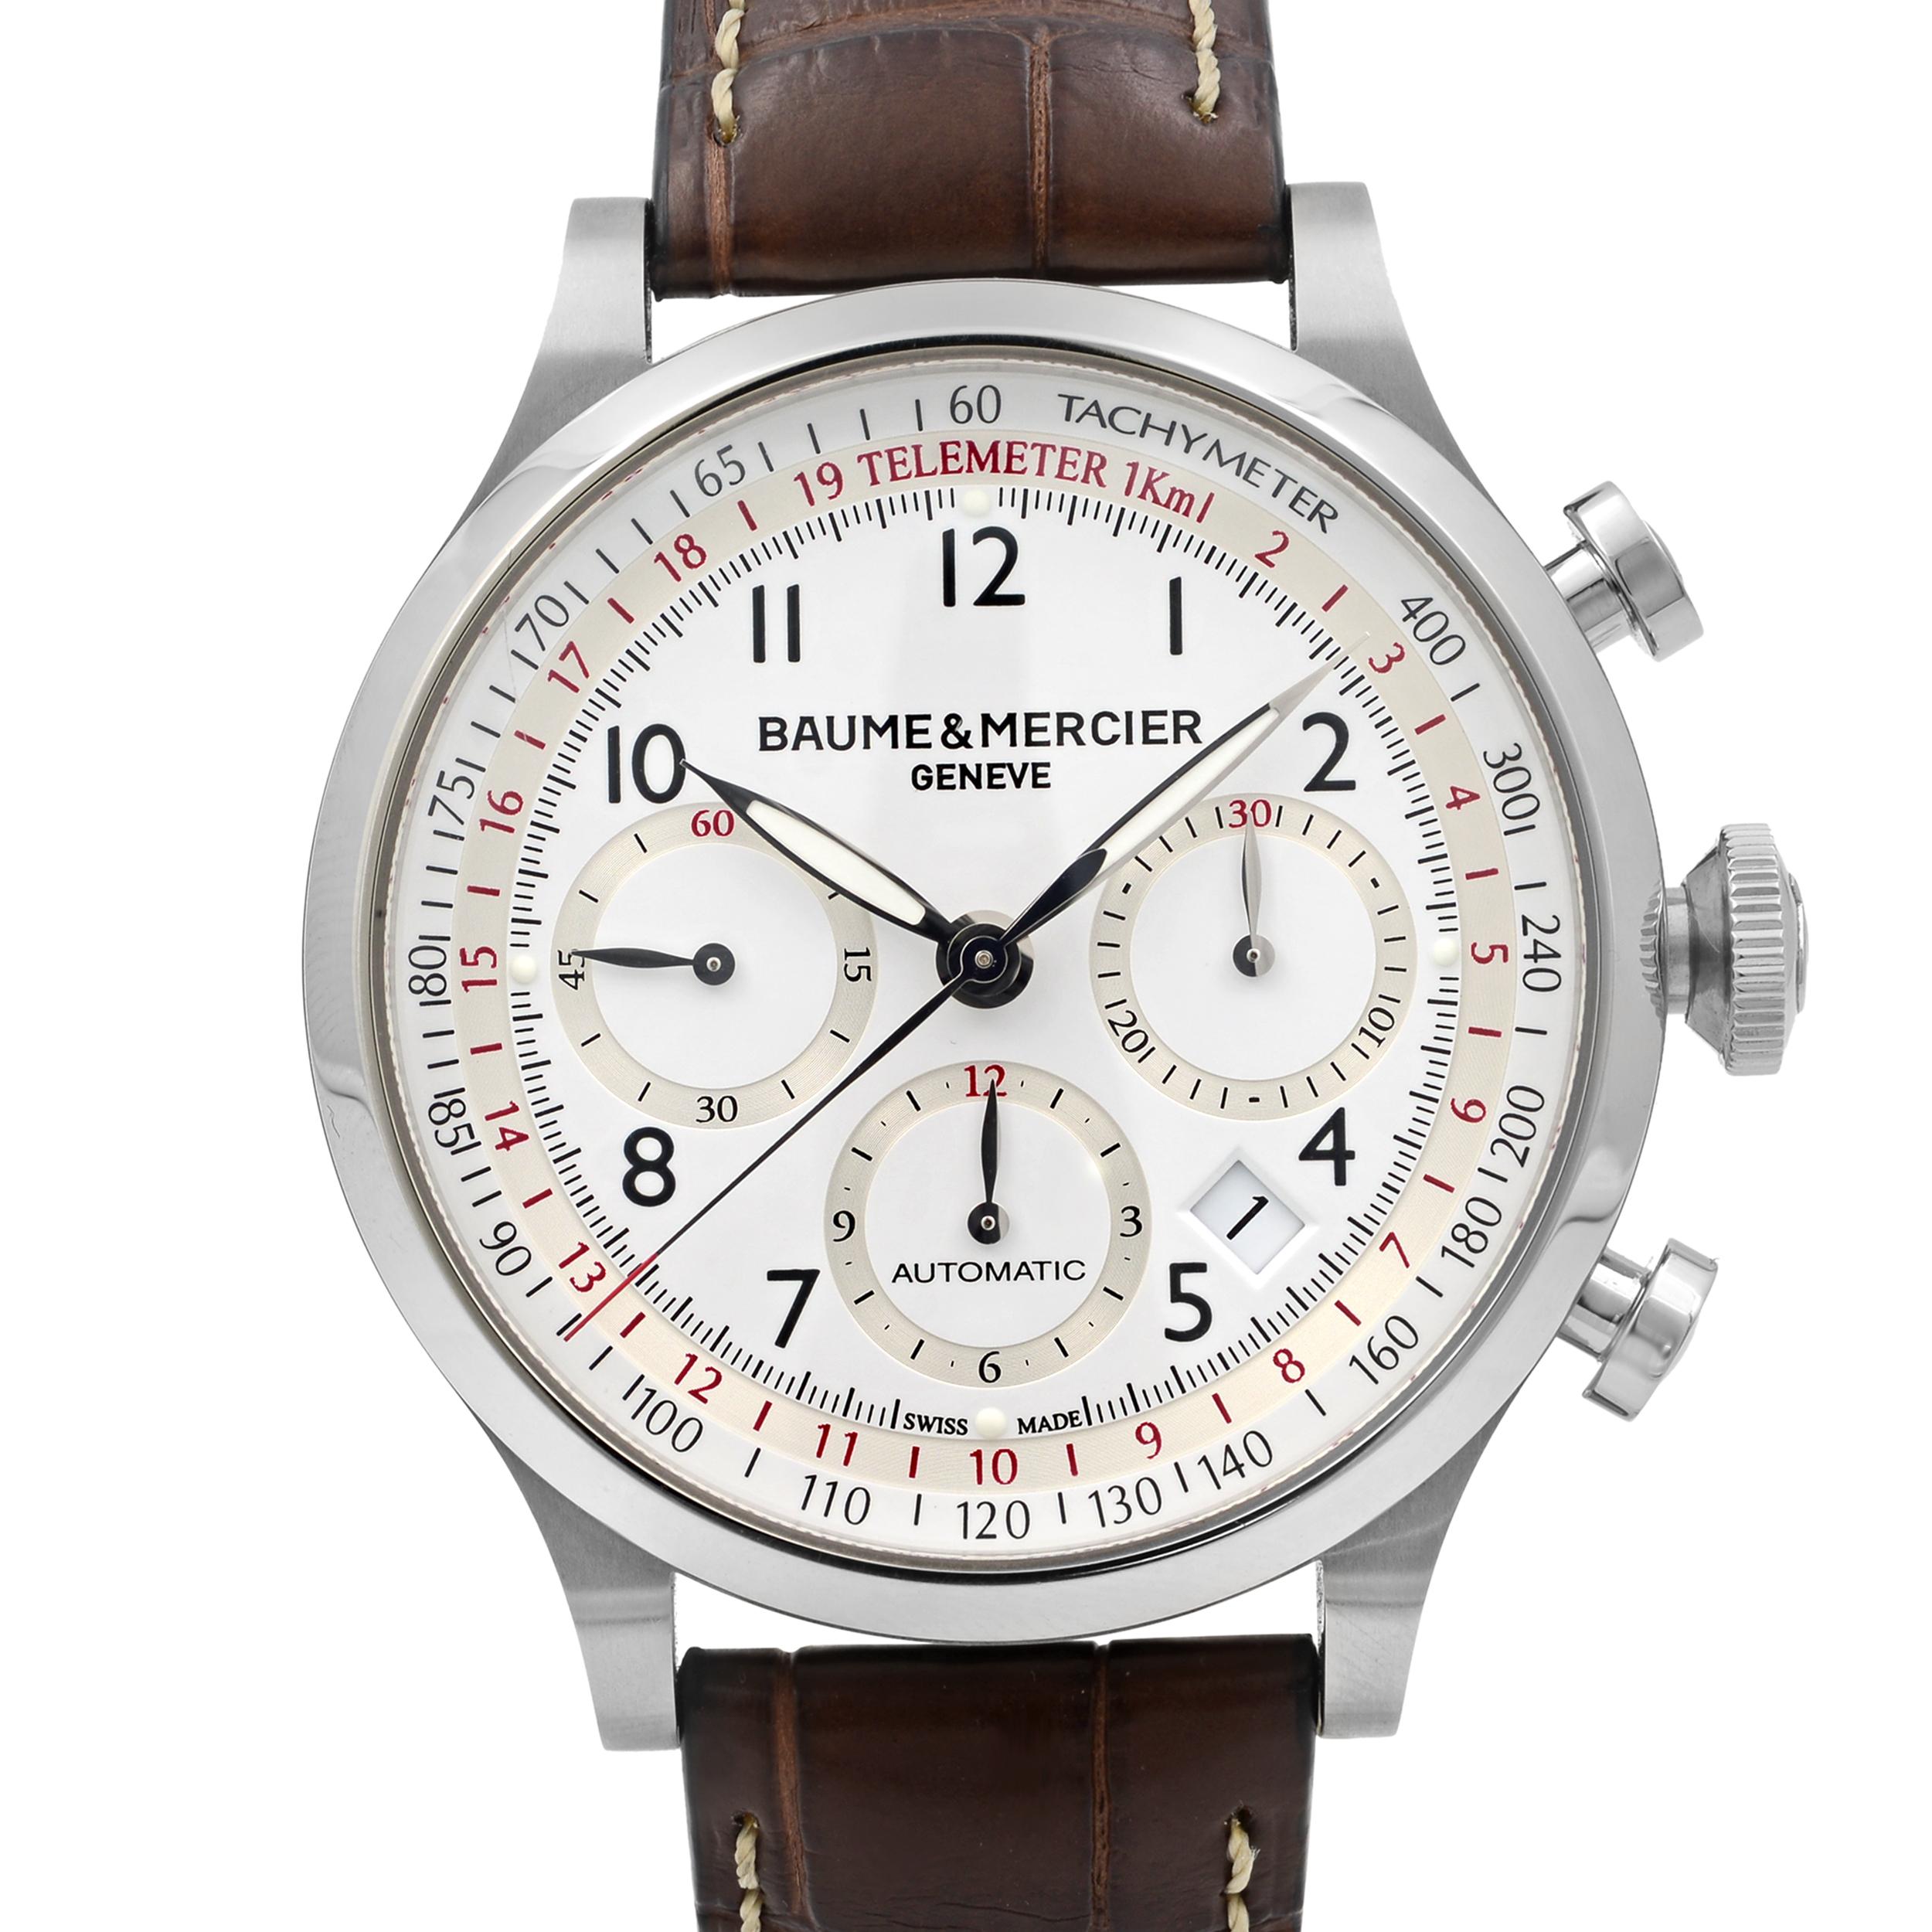 This never been worn  Baume et Mercier Capeland 10082 is a beautiful men's timepiece that is powered by mechanical (automatic) movement which is cased in a stainless steel case. It has a round shape face, chronograph, date indicator, small seconds